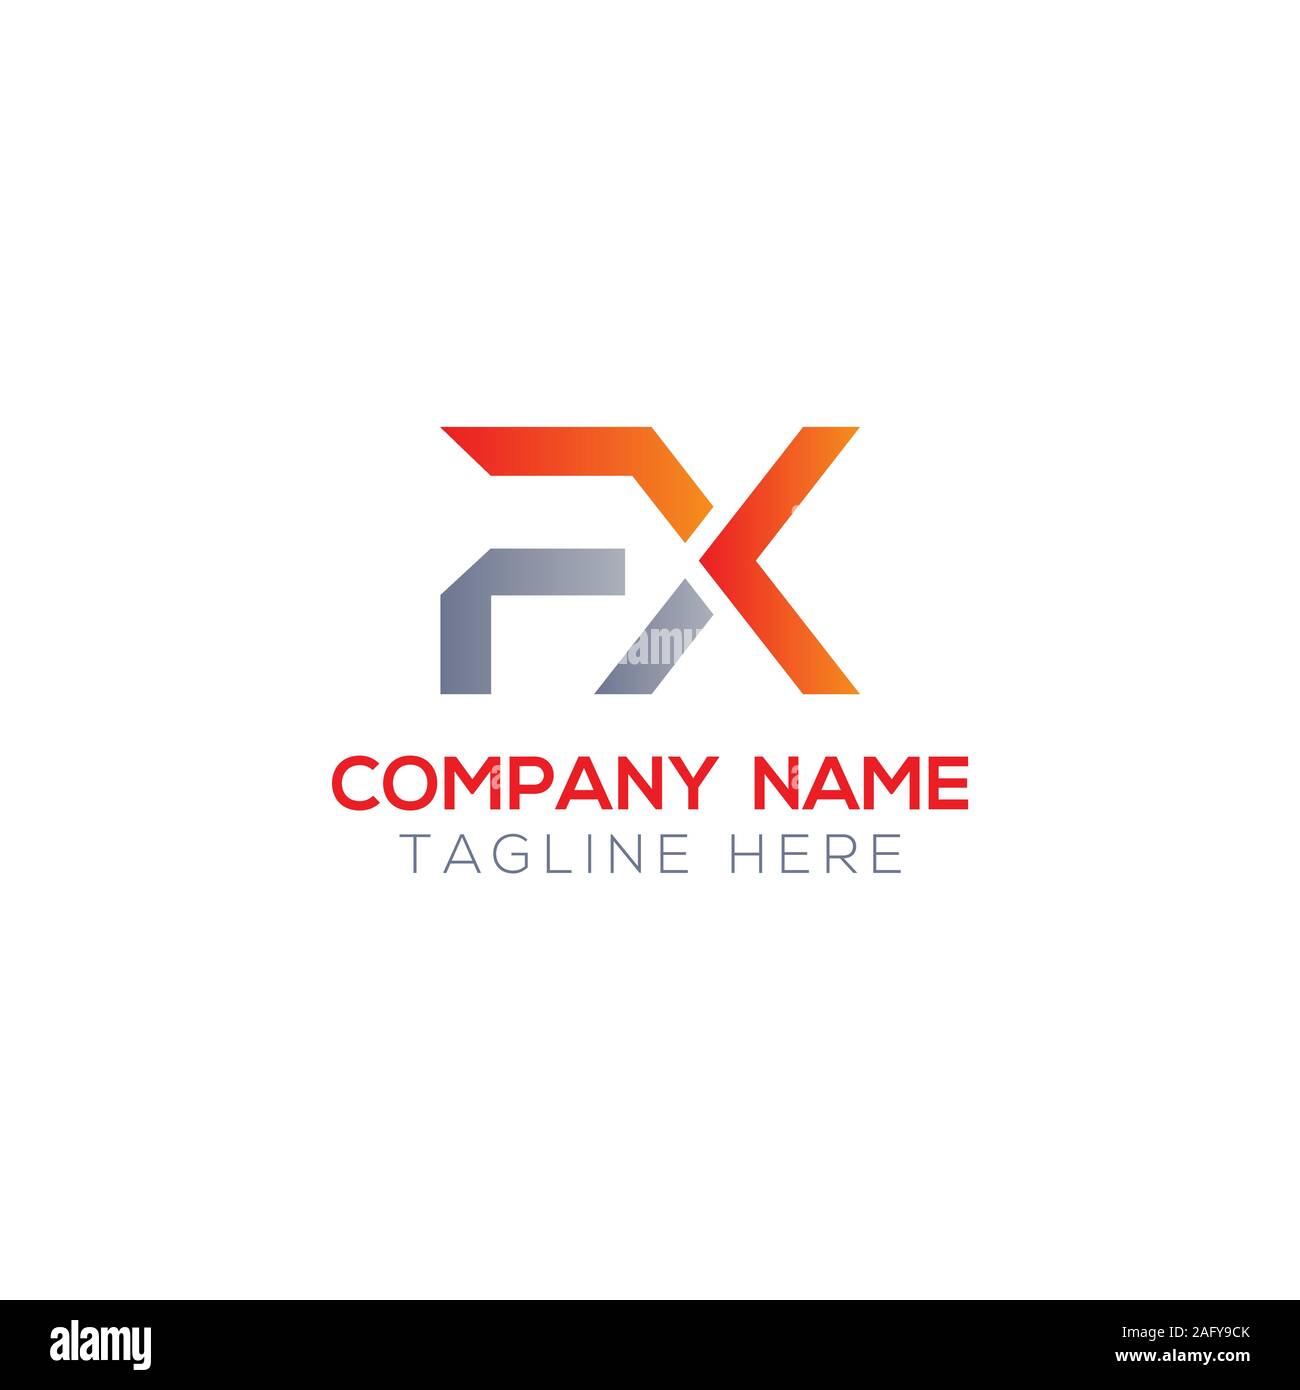 FX Letter Logo Design Graphic by Mahmudul-Hassan · Creative Fabrica